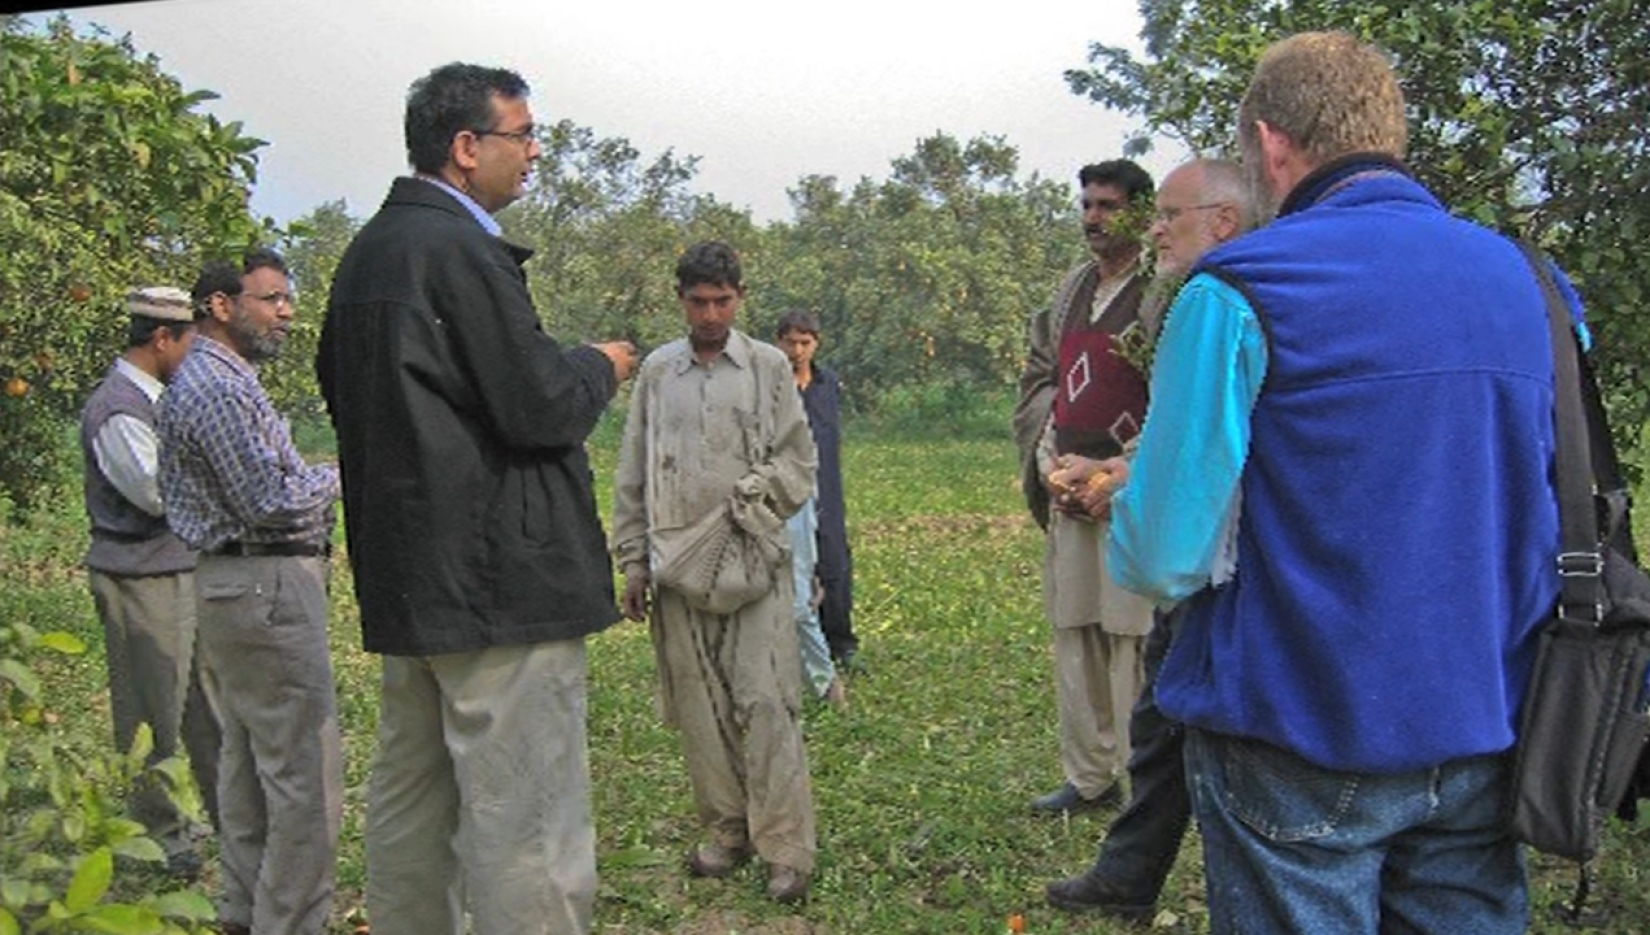 Prof. Shahbaz Khan worked in the field as a hydrologist